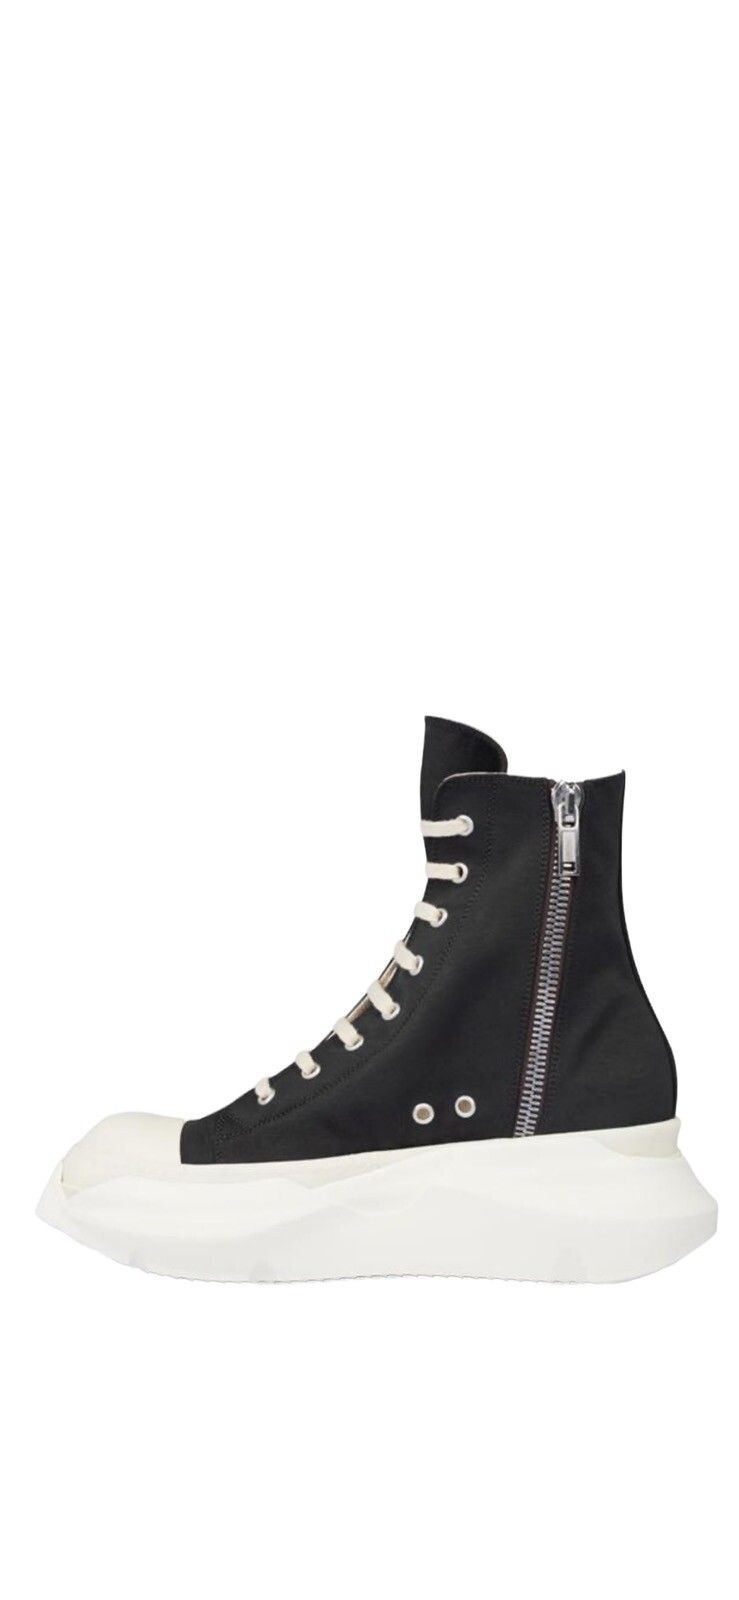 Rick Owens Drkshdw Rick Owen DS Abstract HI Sneakers Size US 11 / EU 44 - 2 Preview